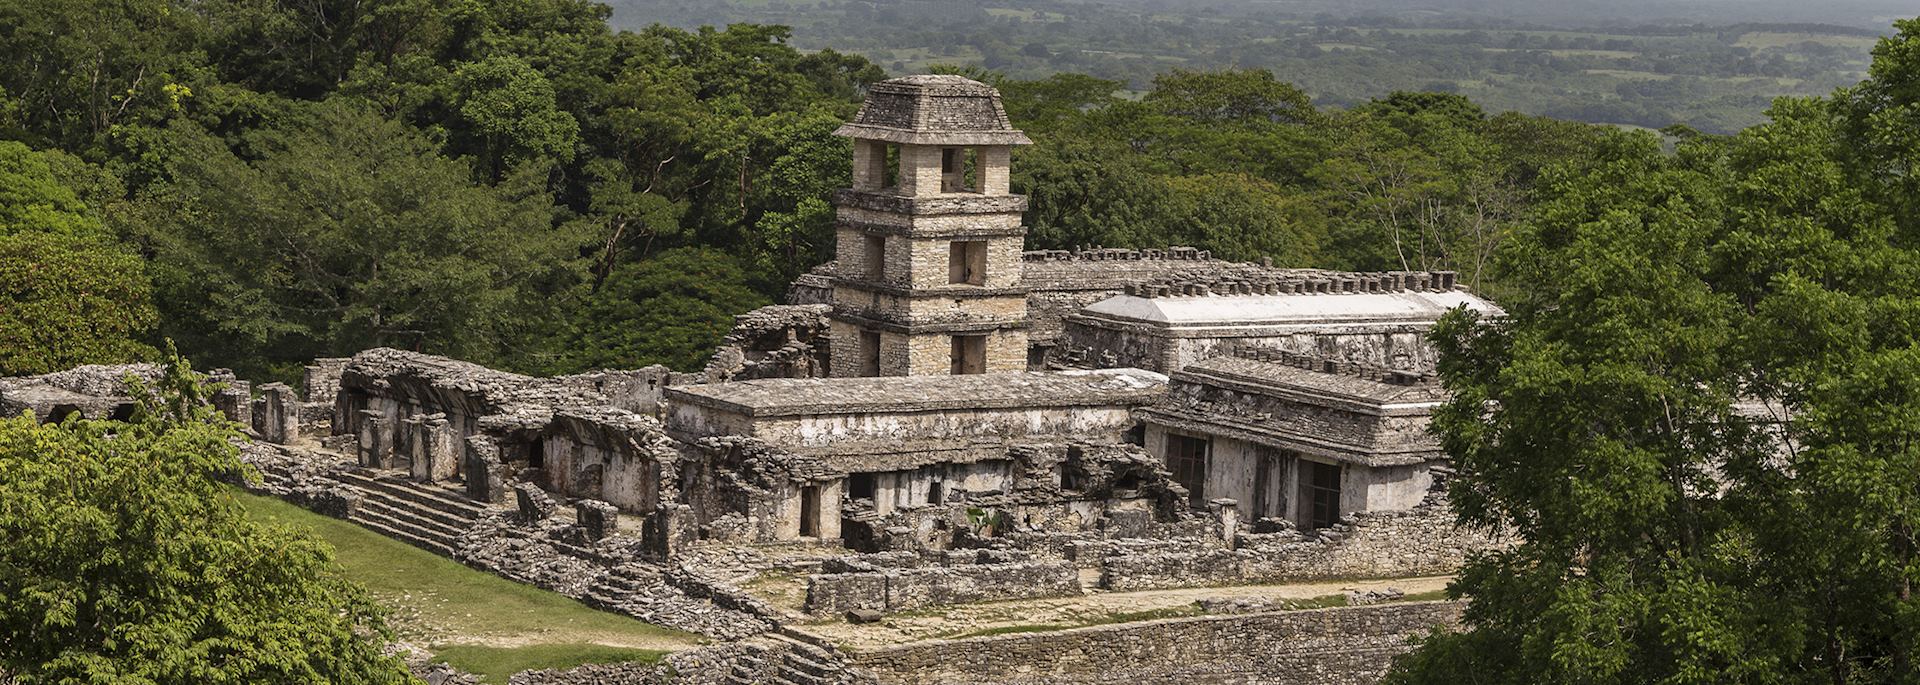 The ancient Mayan city of Palenque